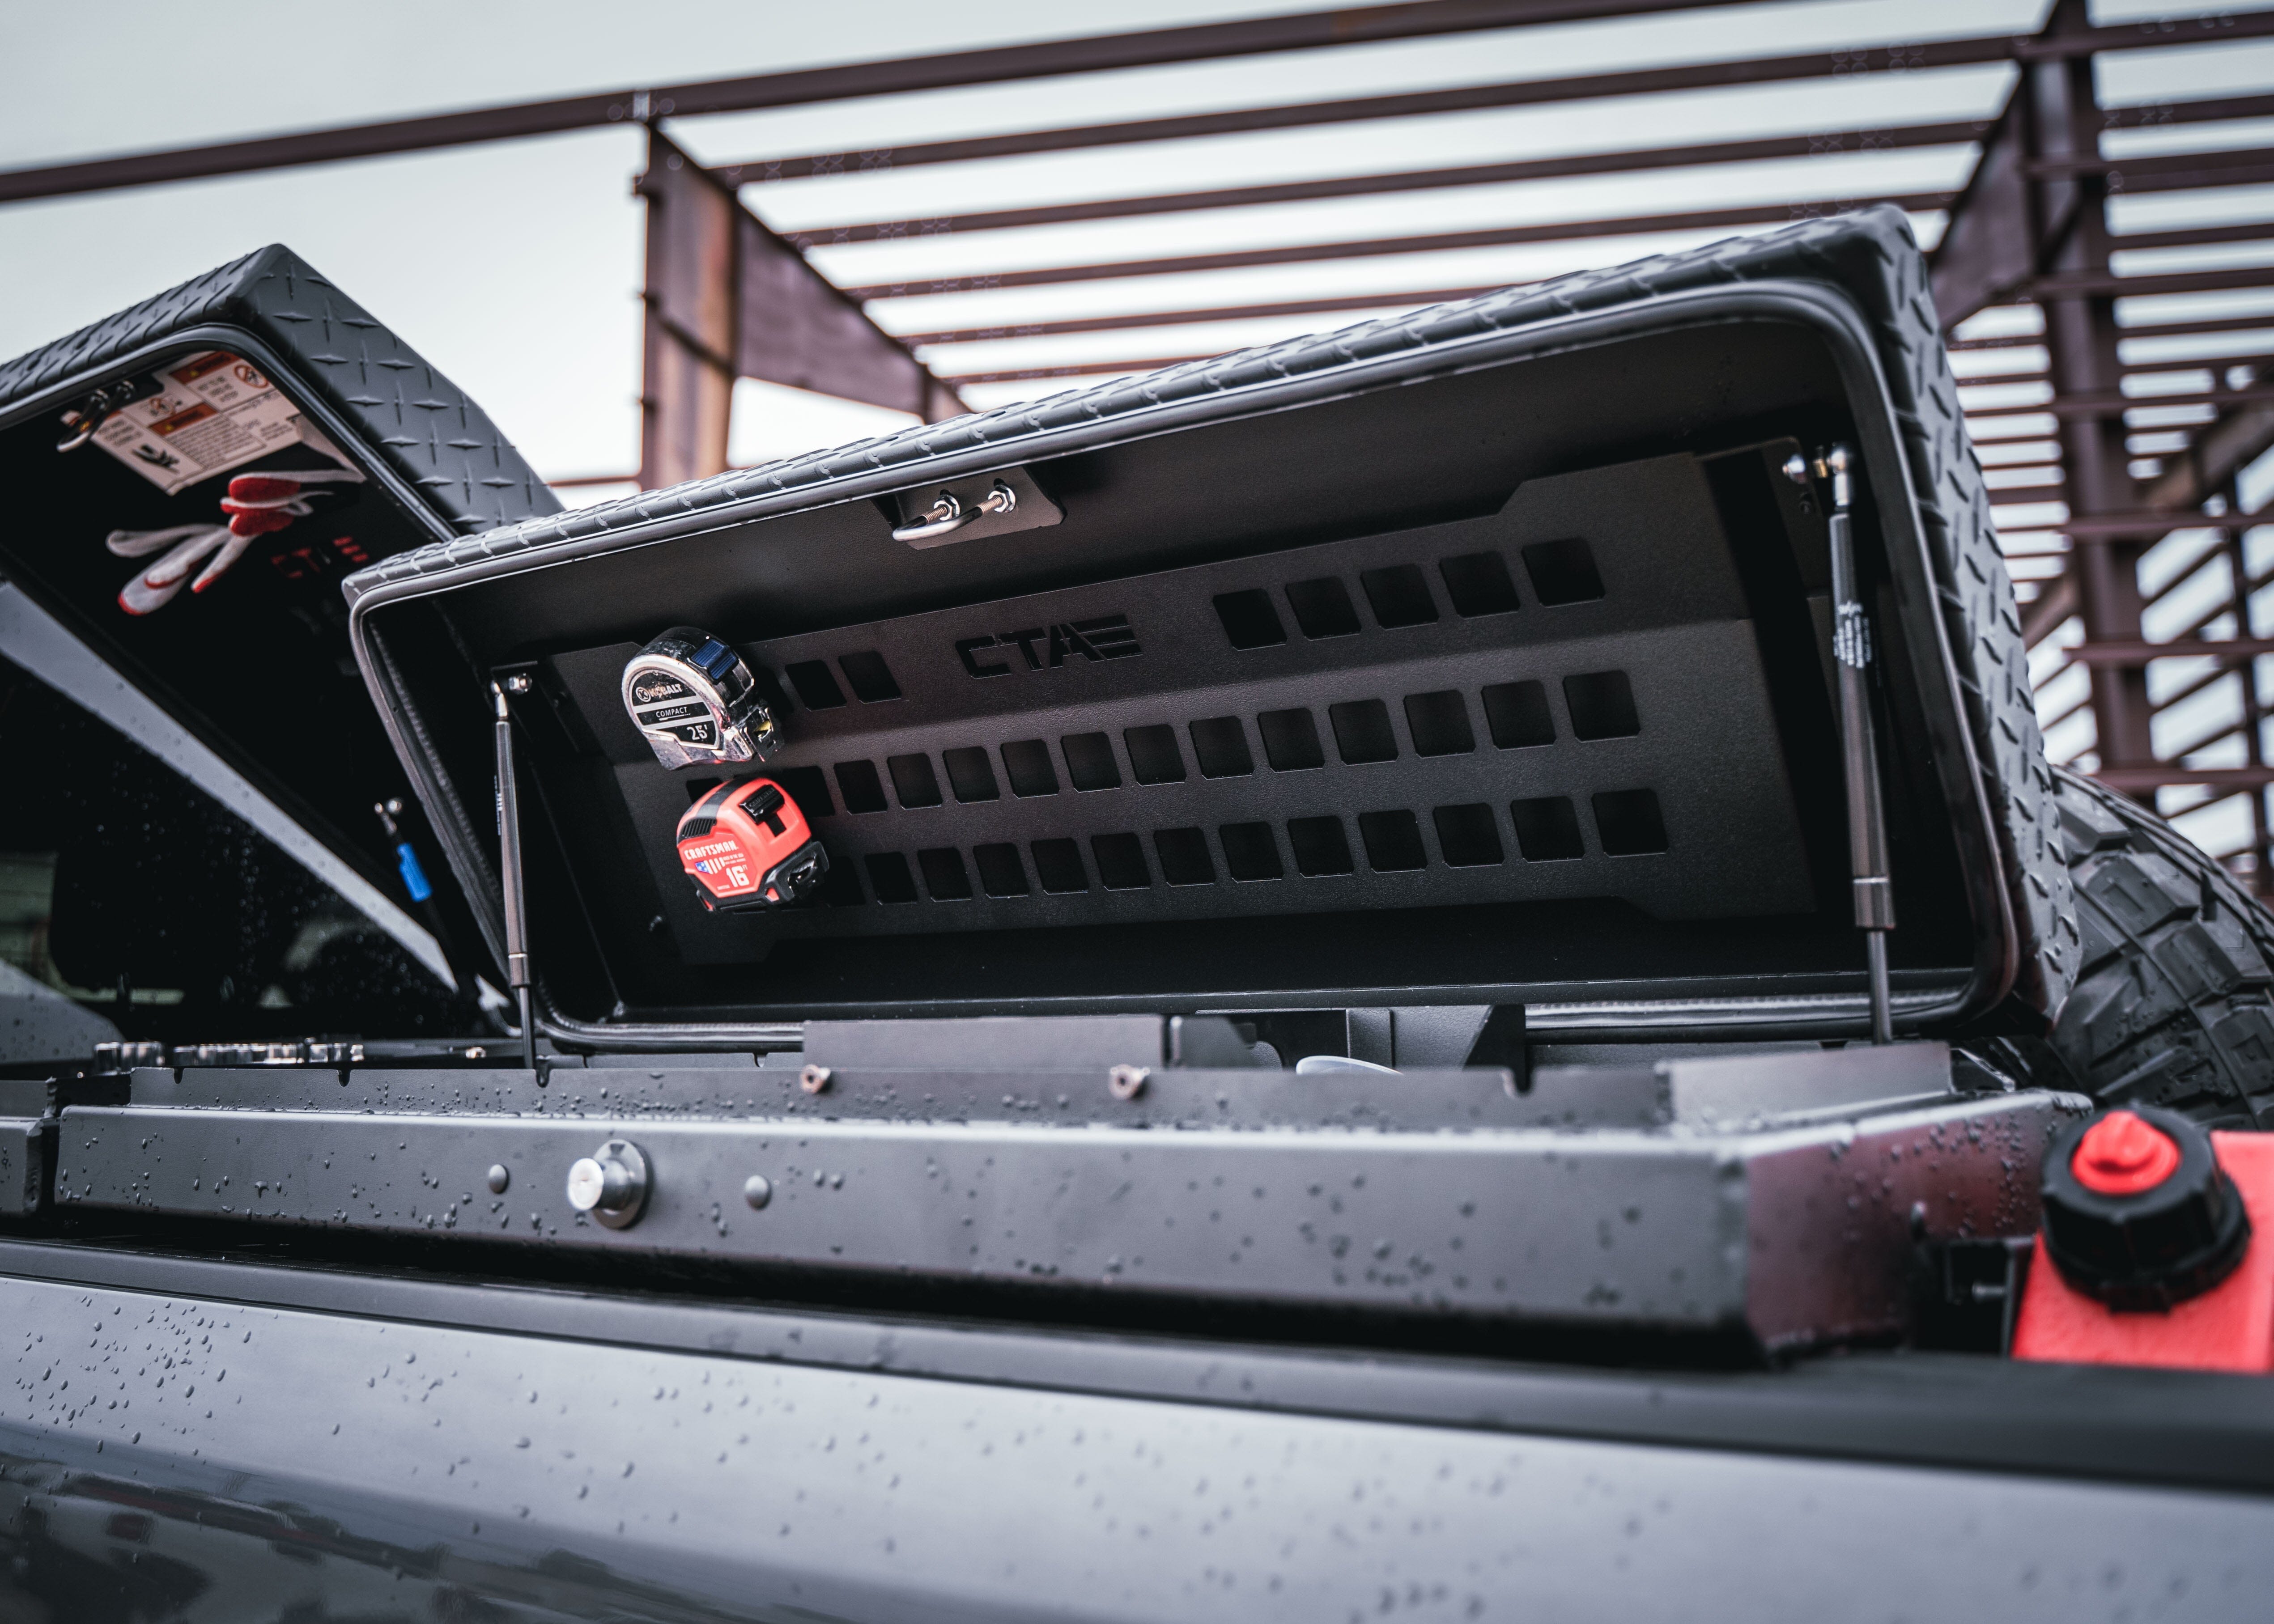  Opened Lo-Side Truck Toolbox attached to side of truck